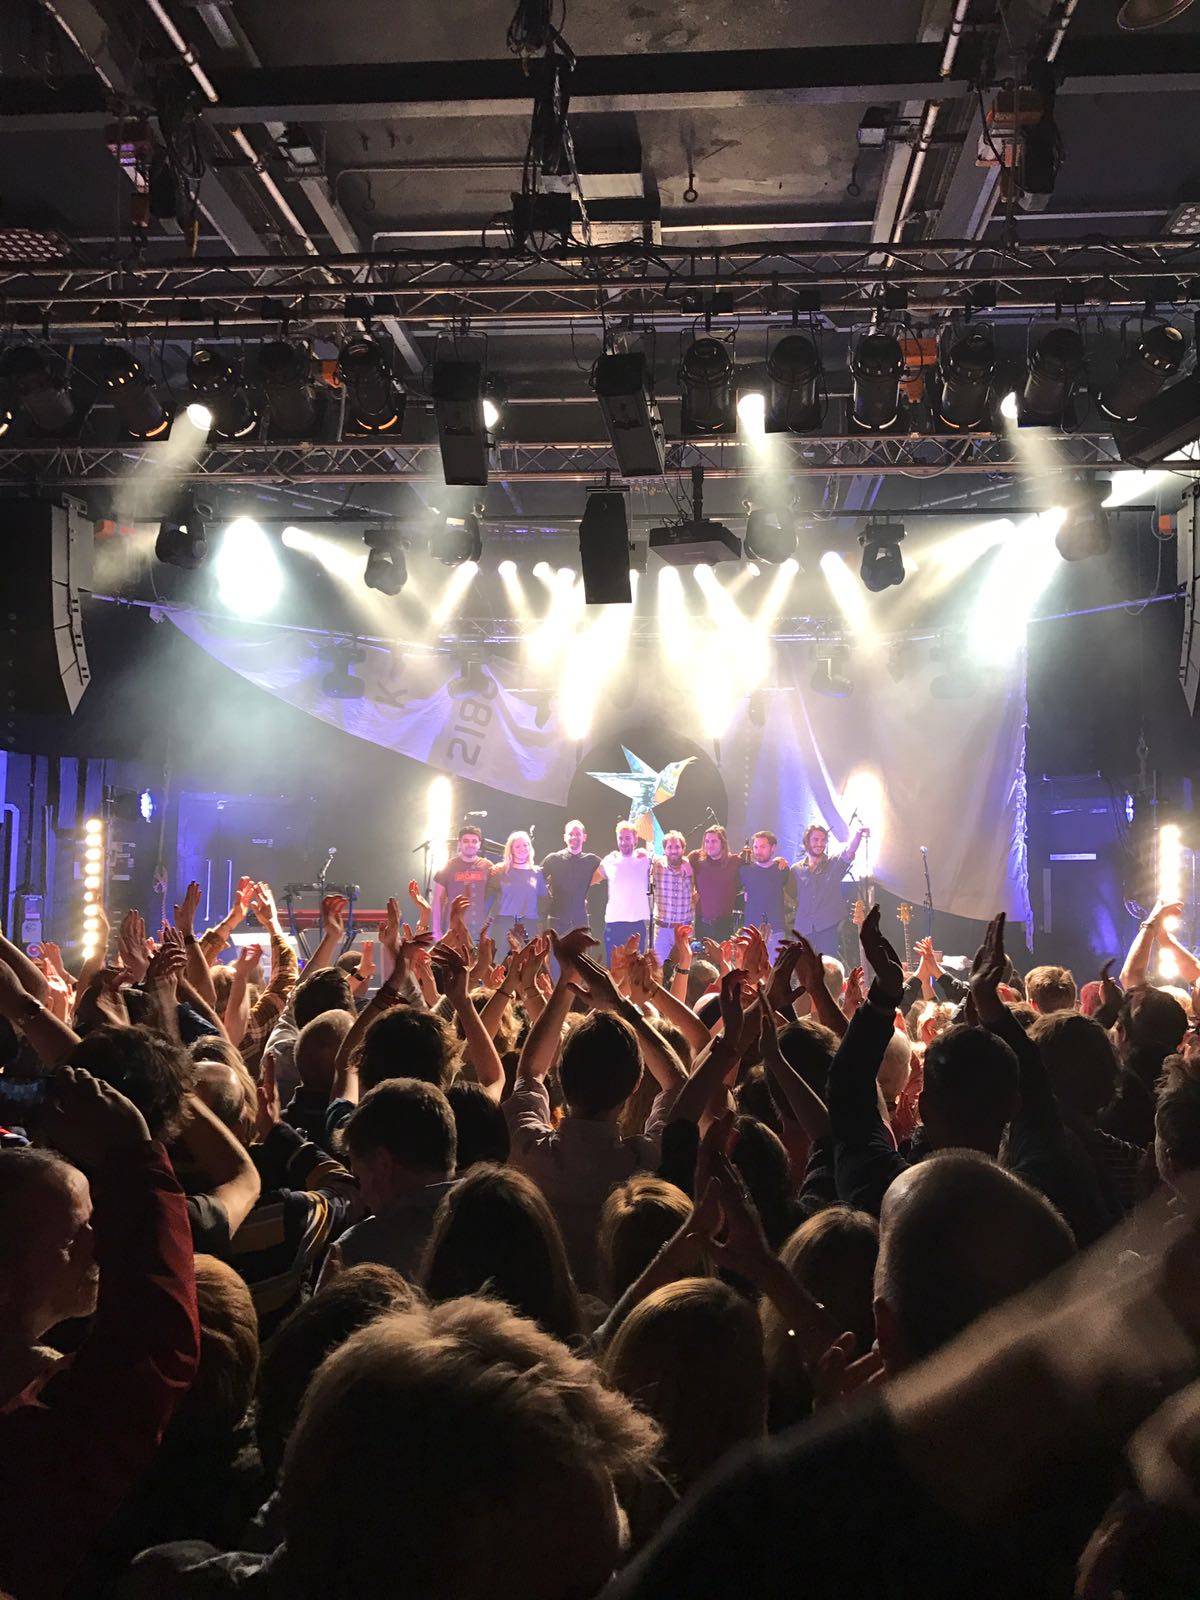 A crowd applauding the band on stage at a concert